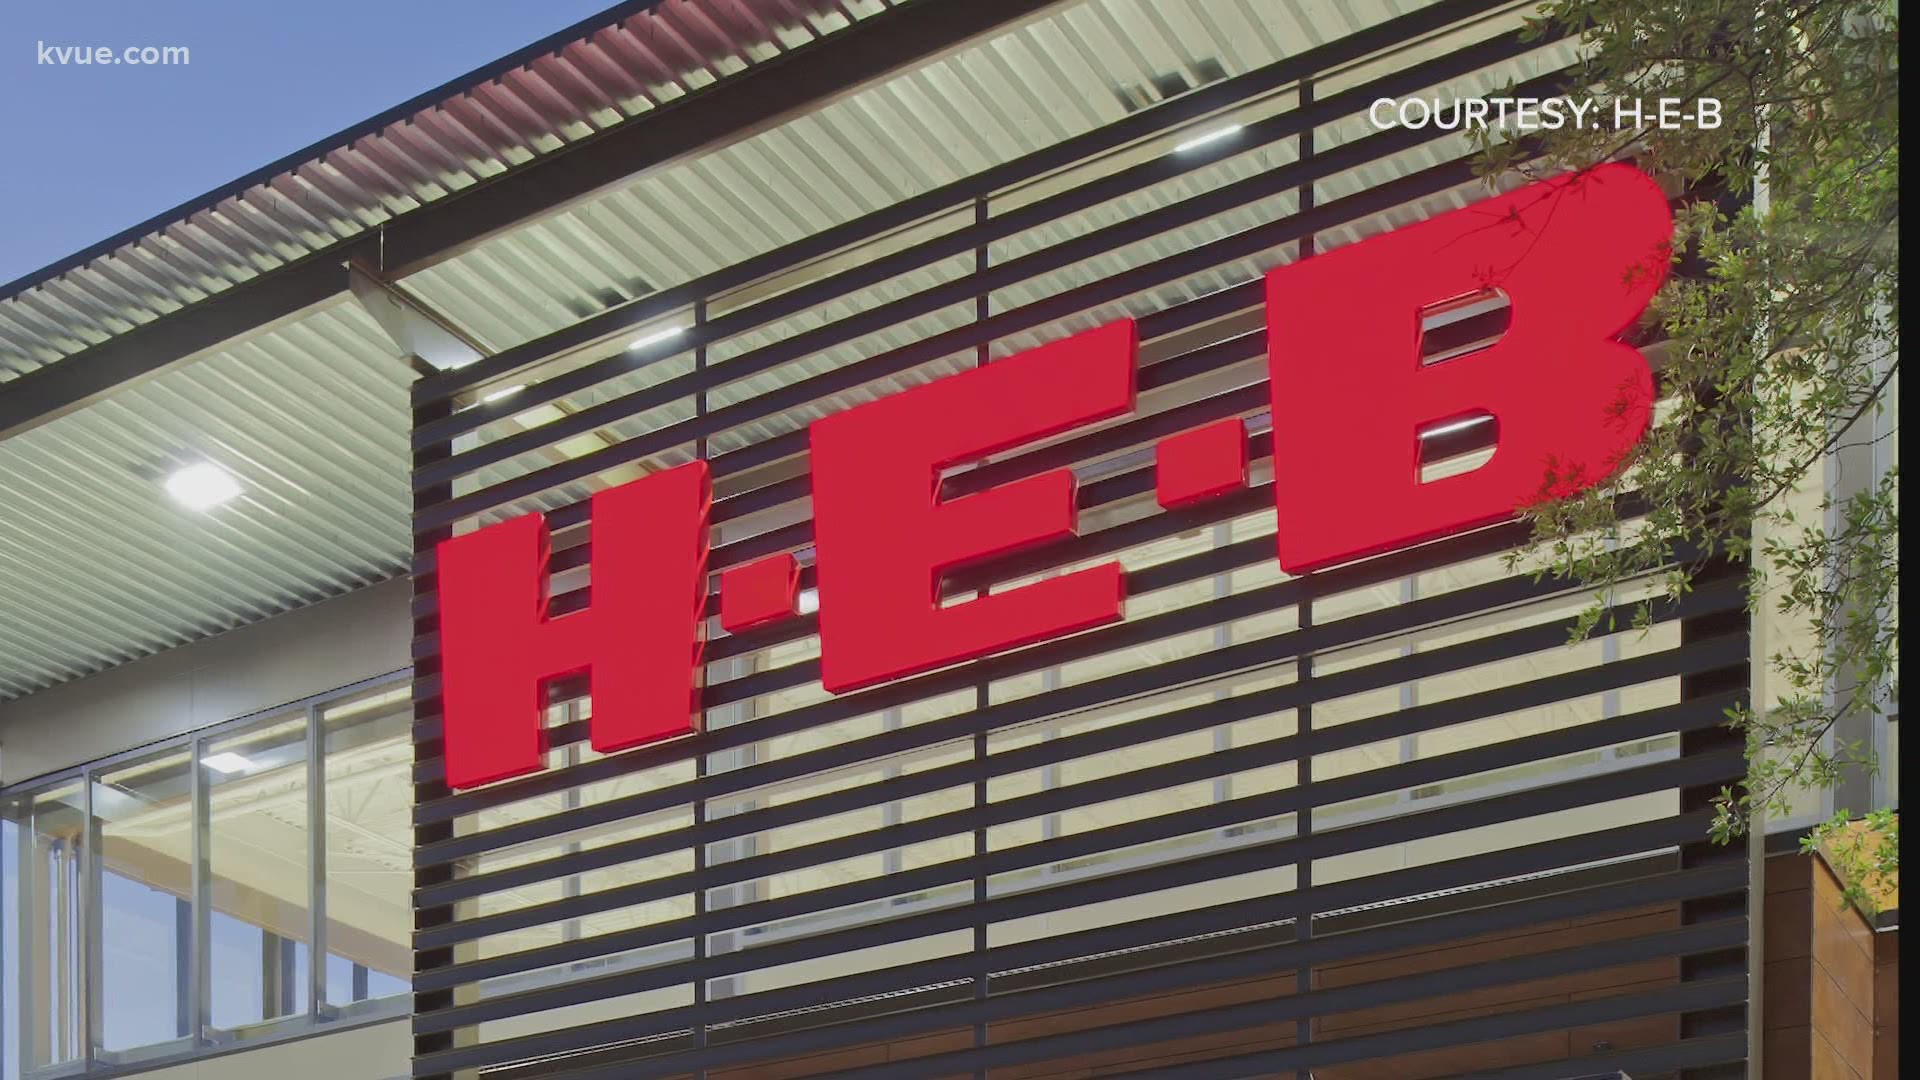 Texas has given H-E-B pharmacies about 100 doses of the COVID-19 vaccine at each location, but they aren't ready to vaccinate people in Phase 1B yet.